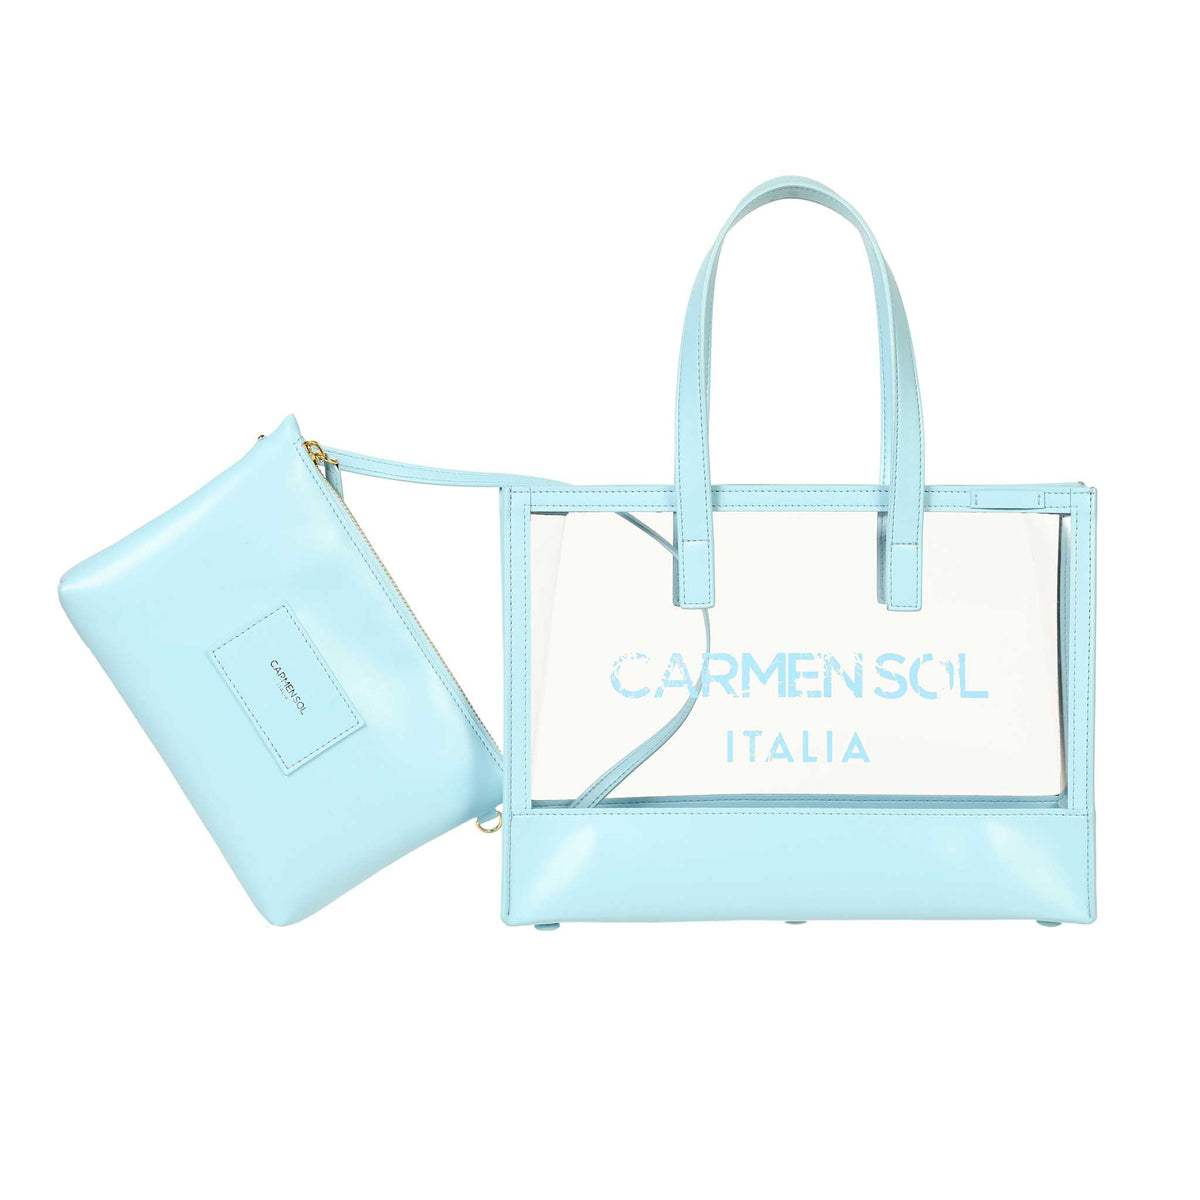 Vegan mini clear beach bags for women in color baby blue with detachable bag